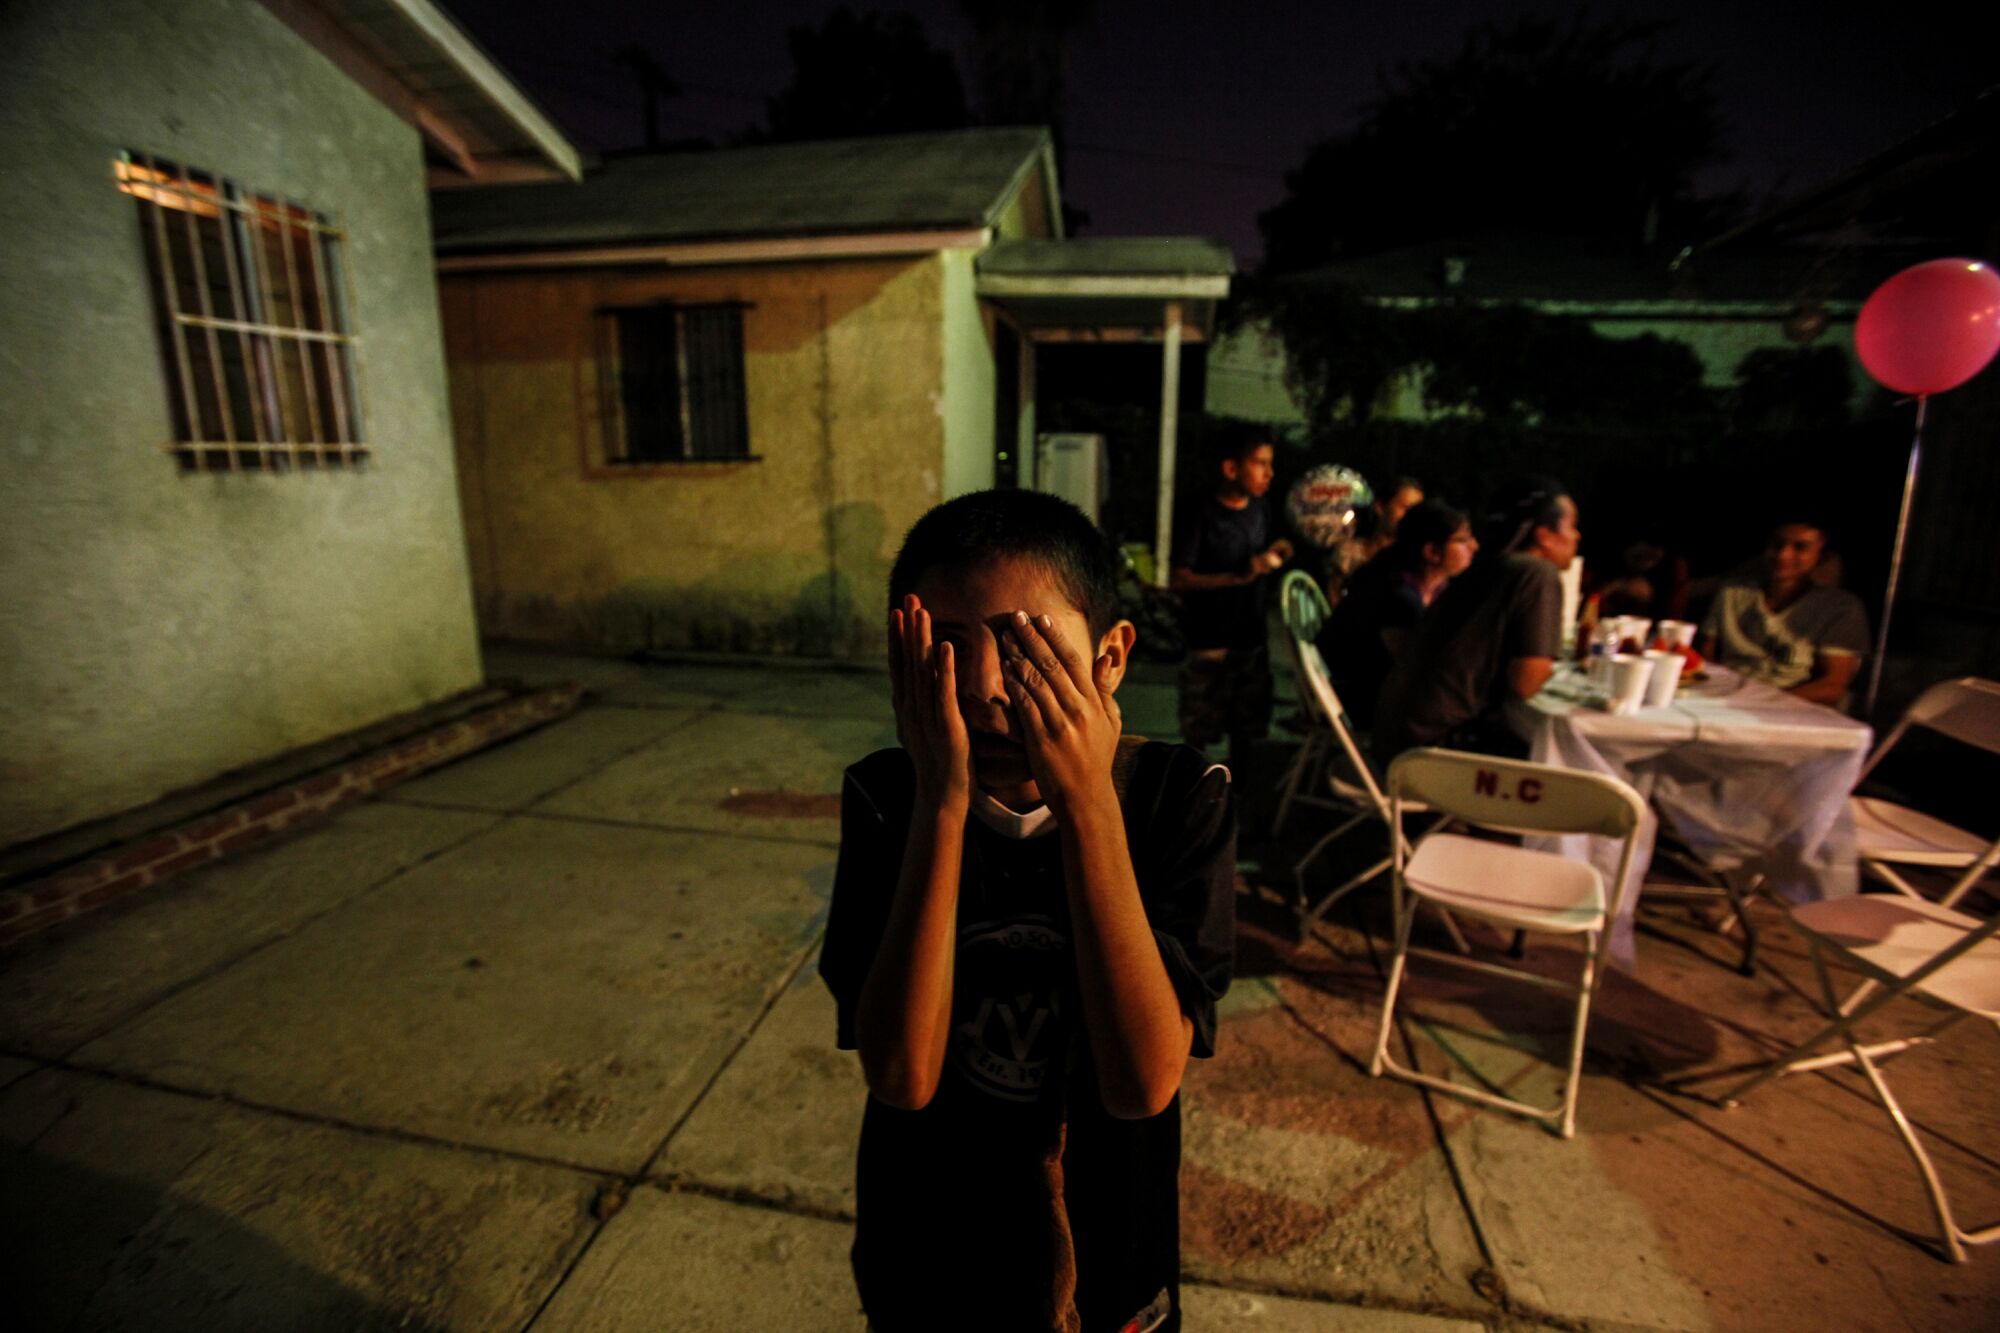 Jese Castillo, 11, covers his eyes as he plays during his 11th birthday party in his back yard, in South Los Angeles.